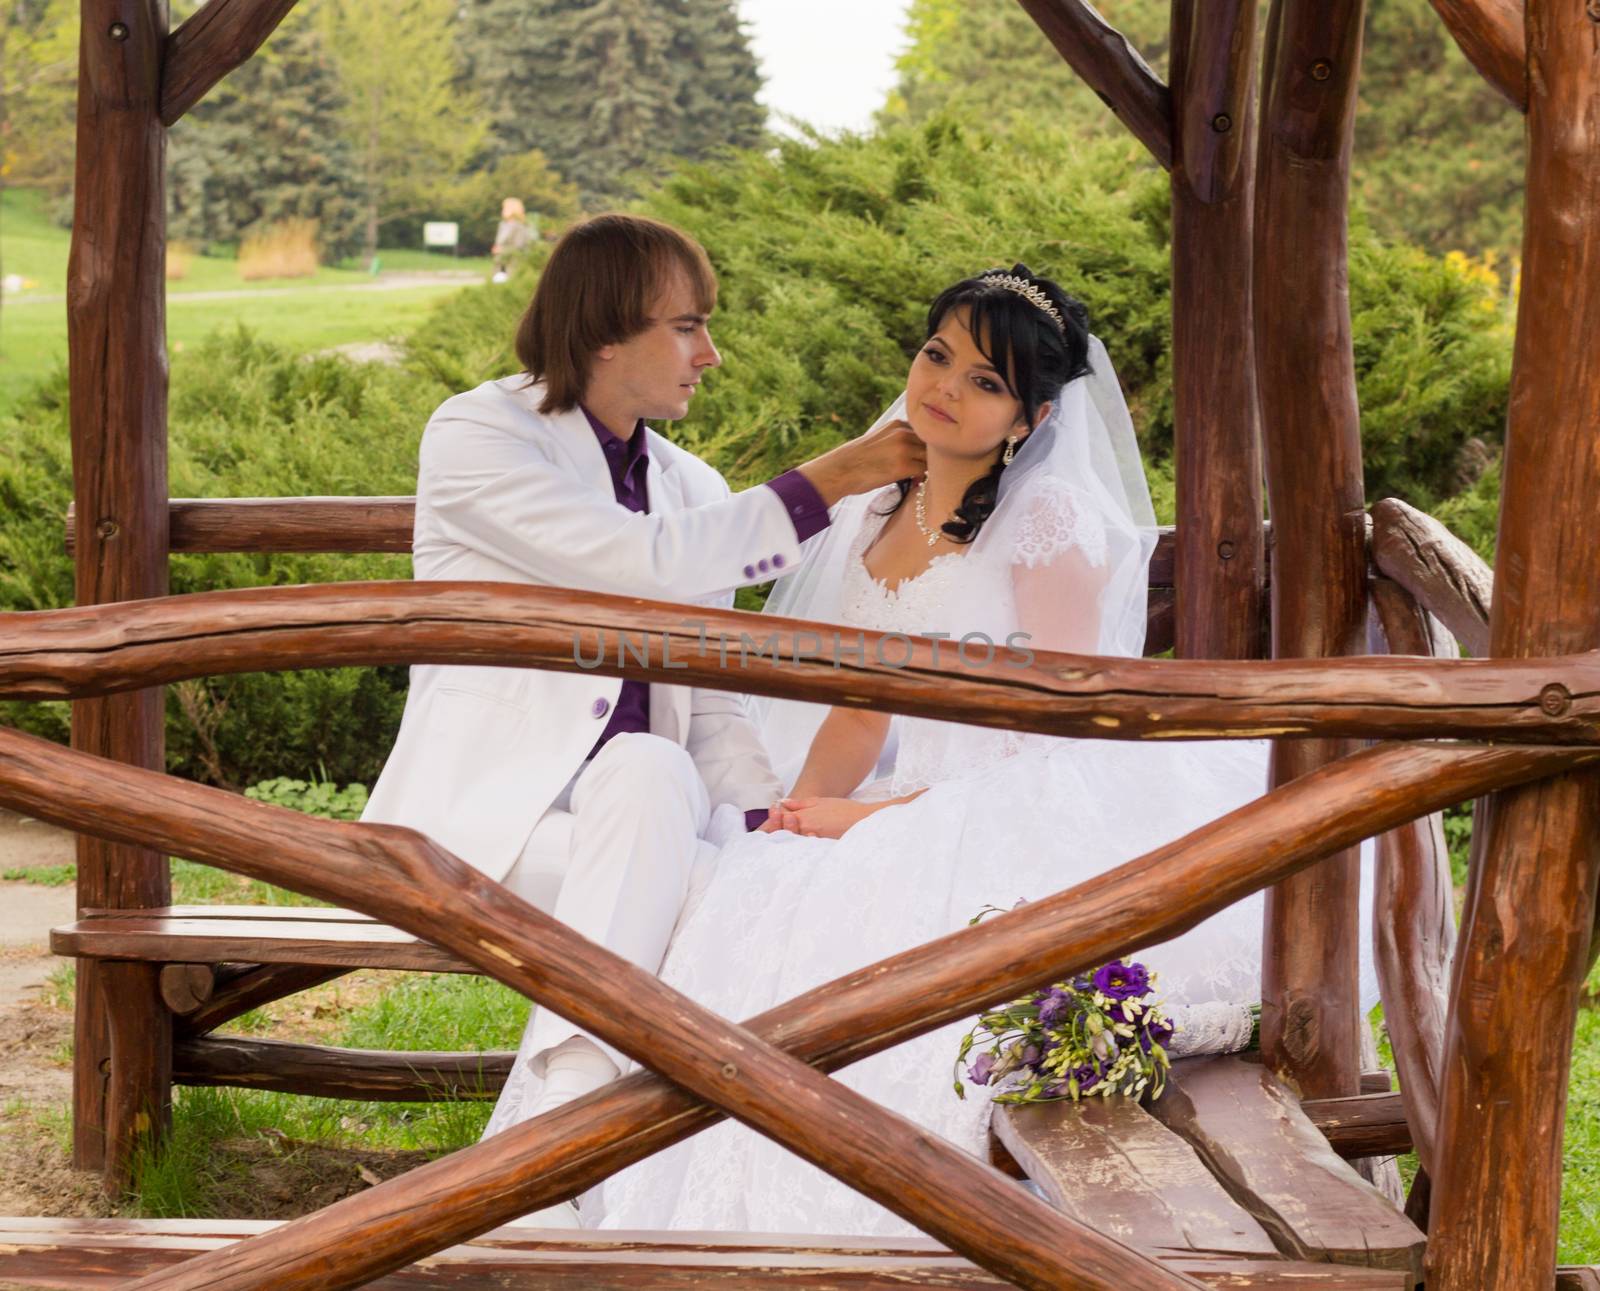 Couple in love bride and groom posing sitting on wooden bench in gazebo in their wedding day in summer.